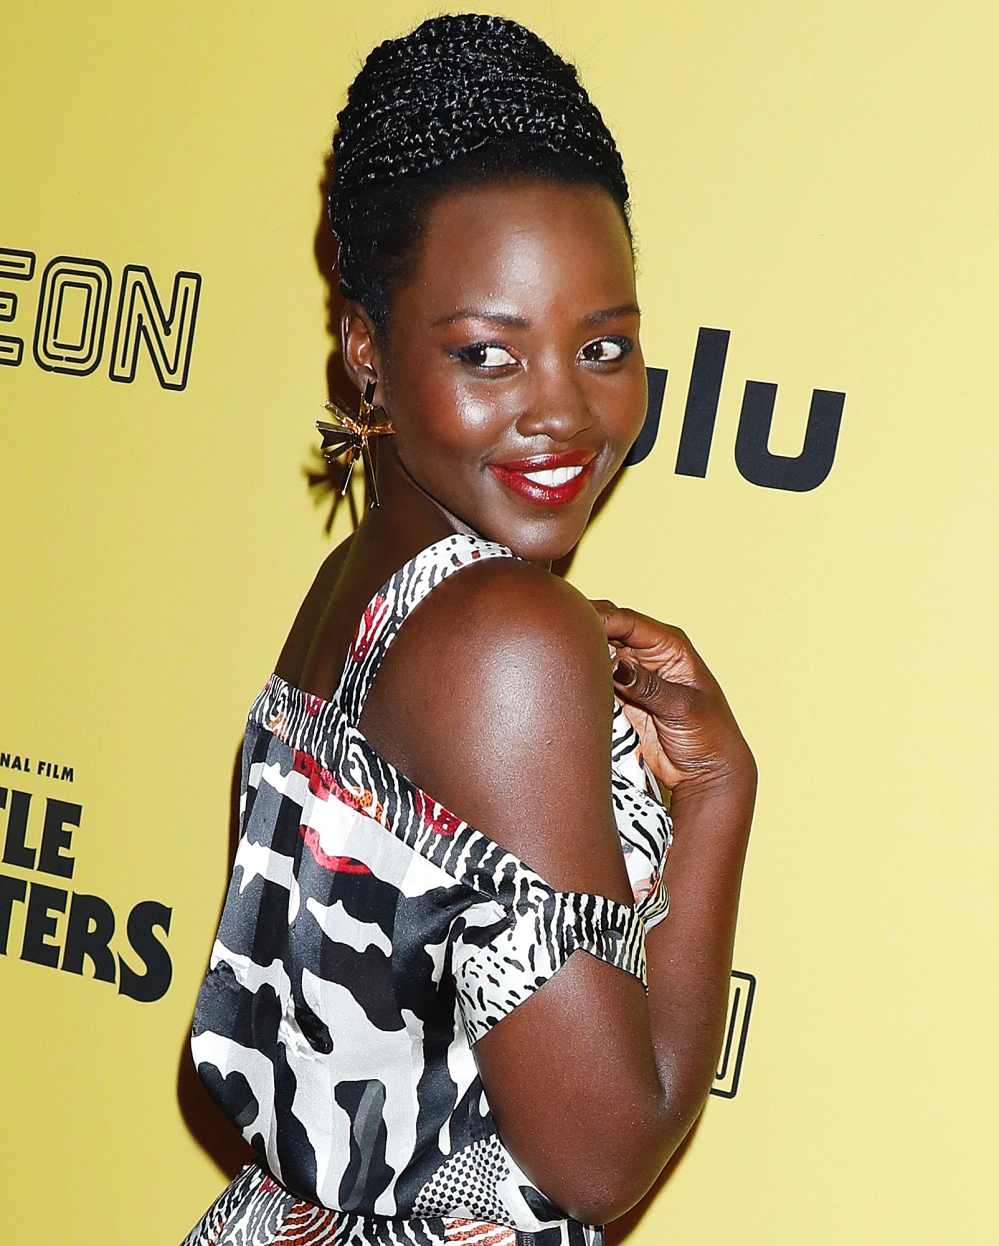 Lupita-Nyong’o-Says-She-Has-No-Plans-For-An-Album